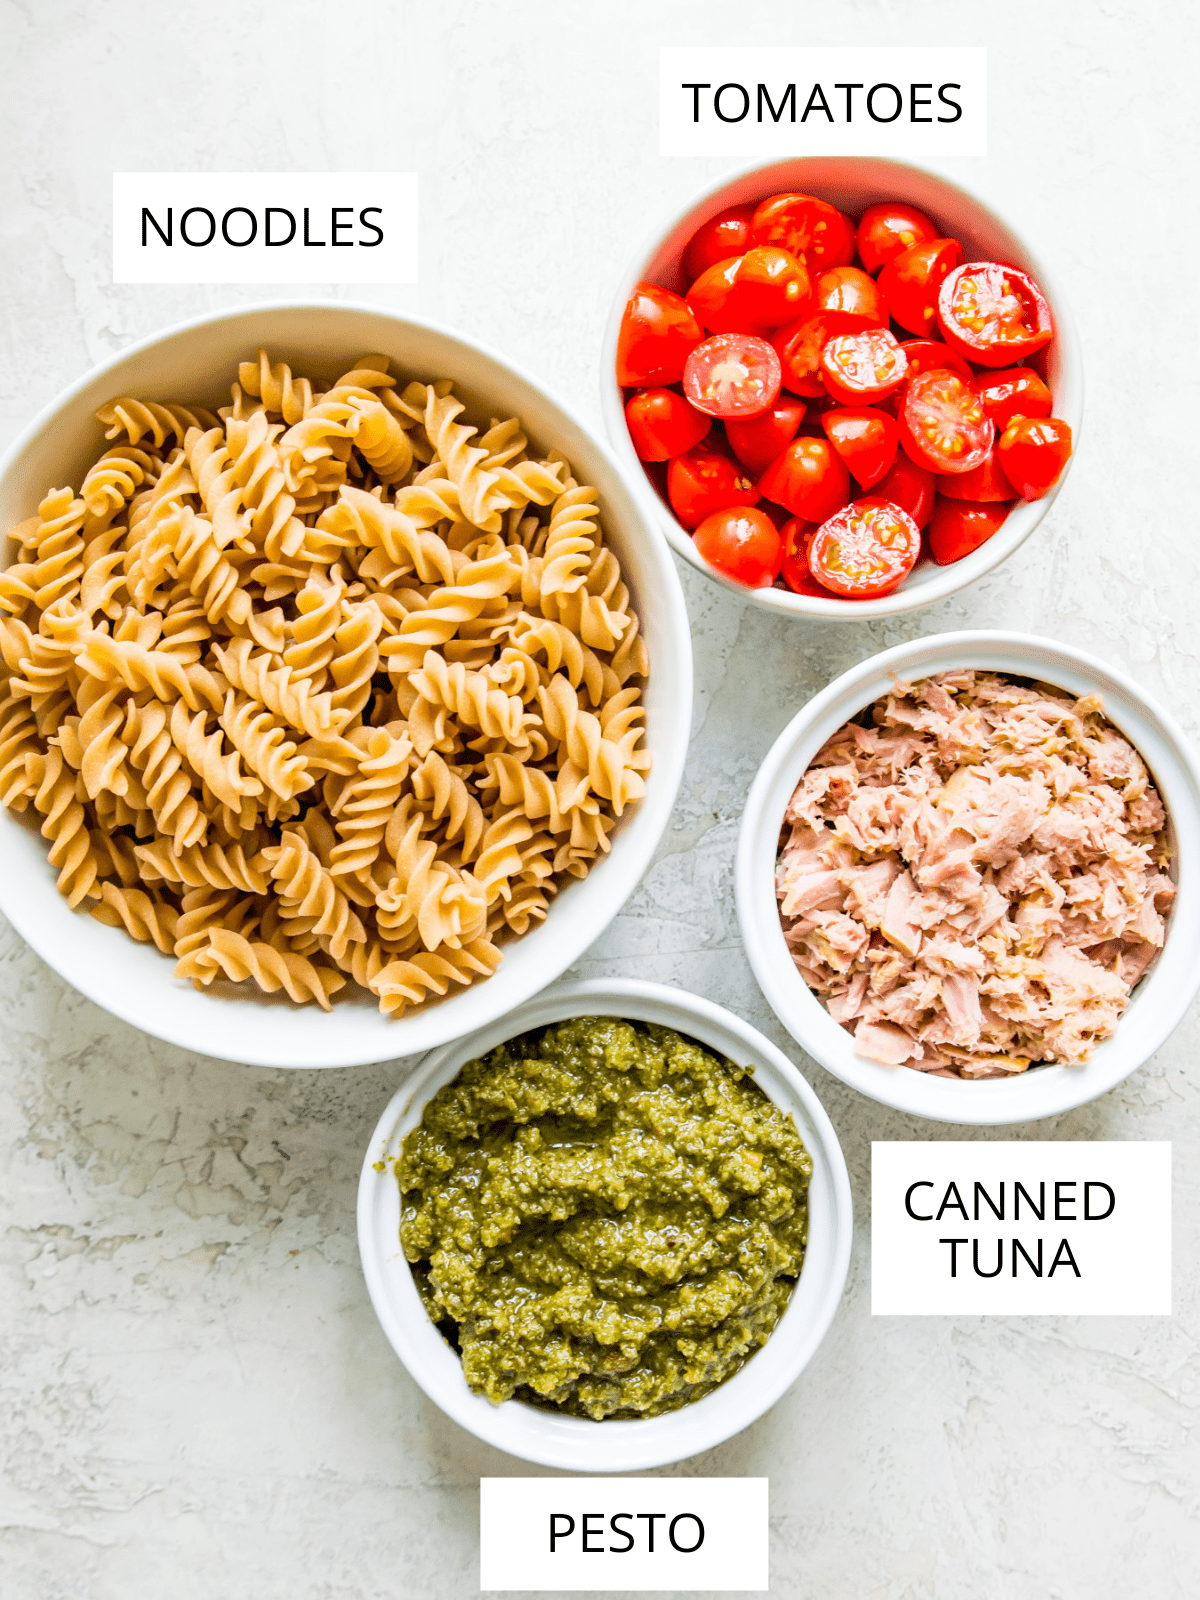 Ingredients needed for making tuna pasta pesto in small bowls.